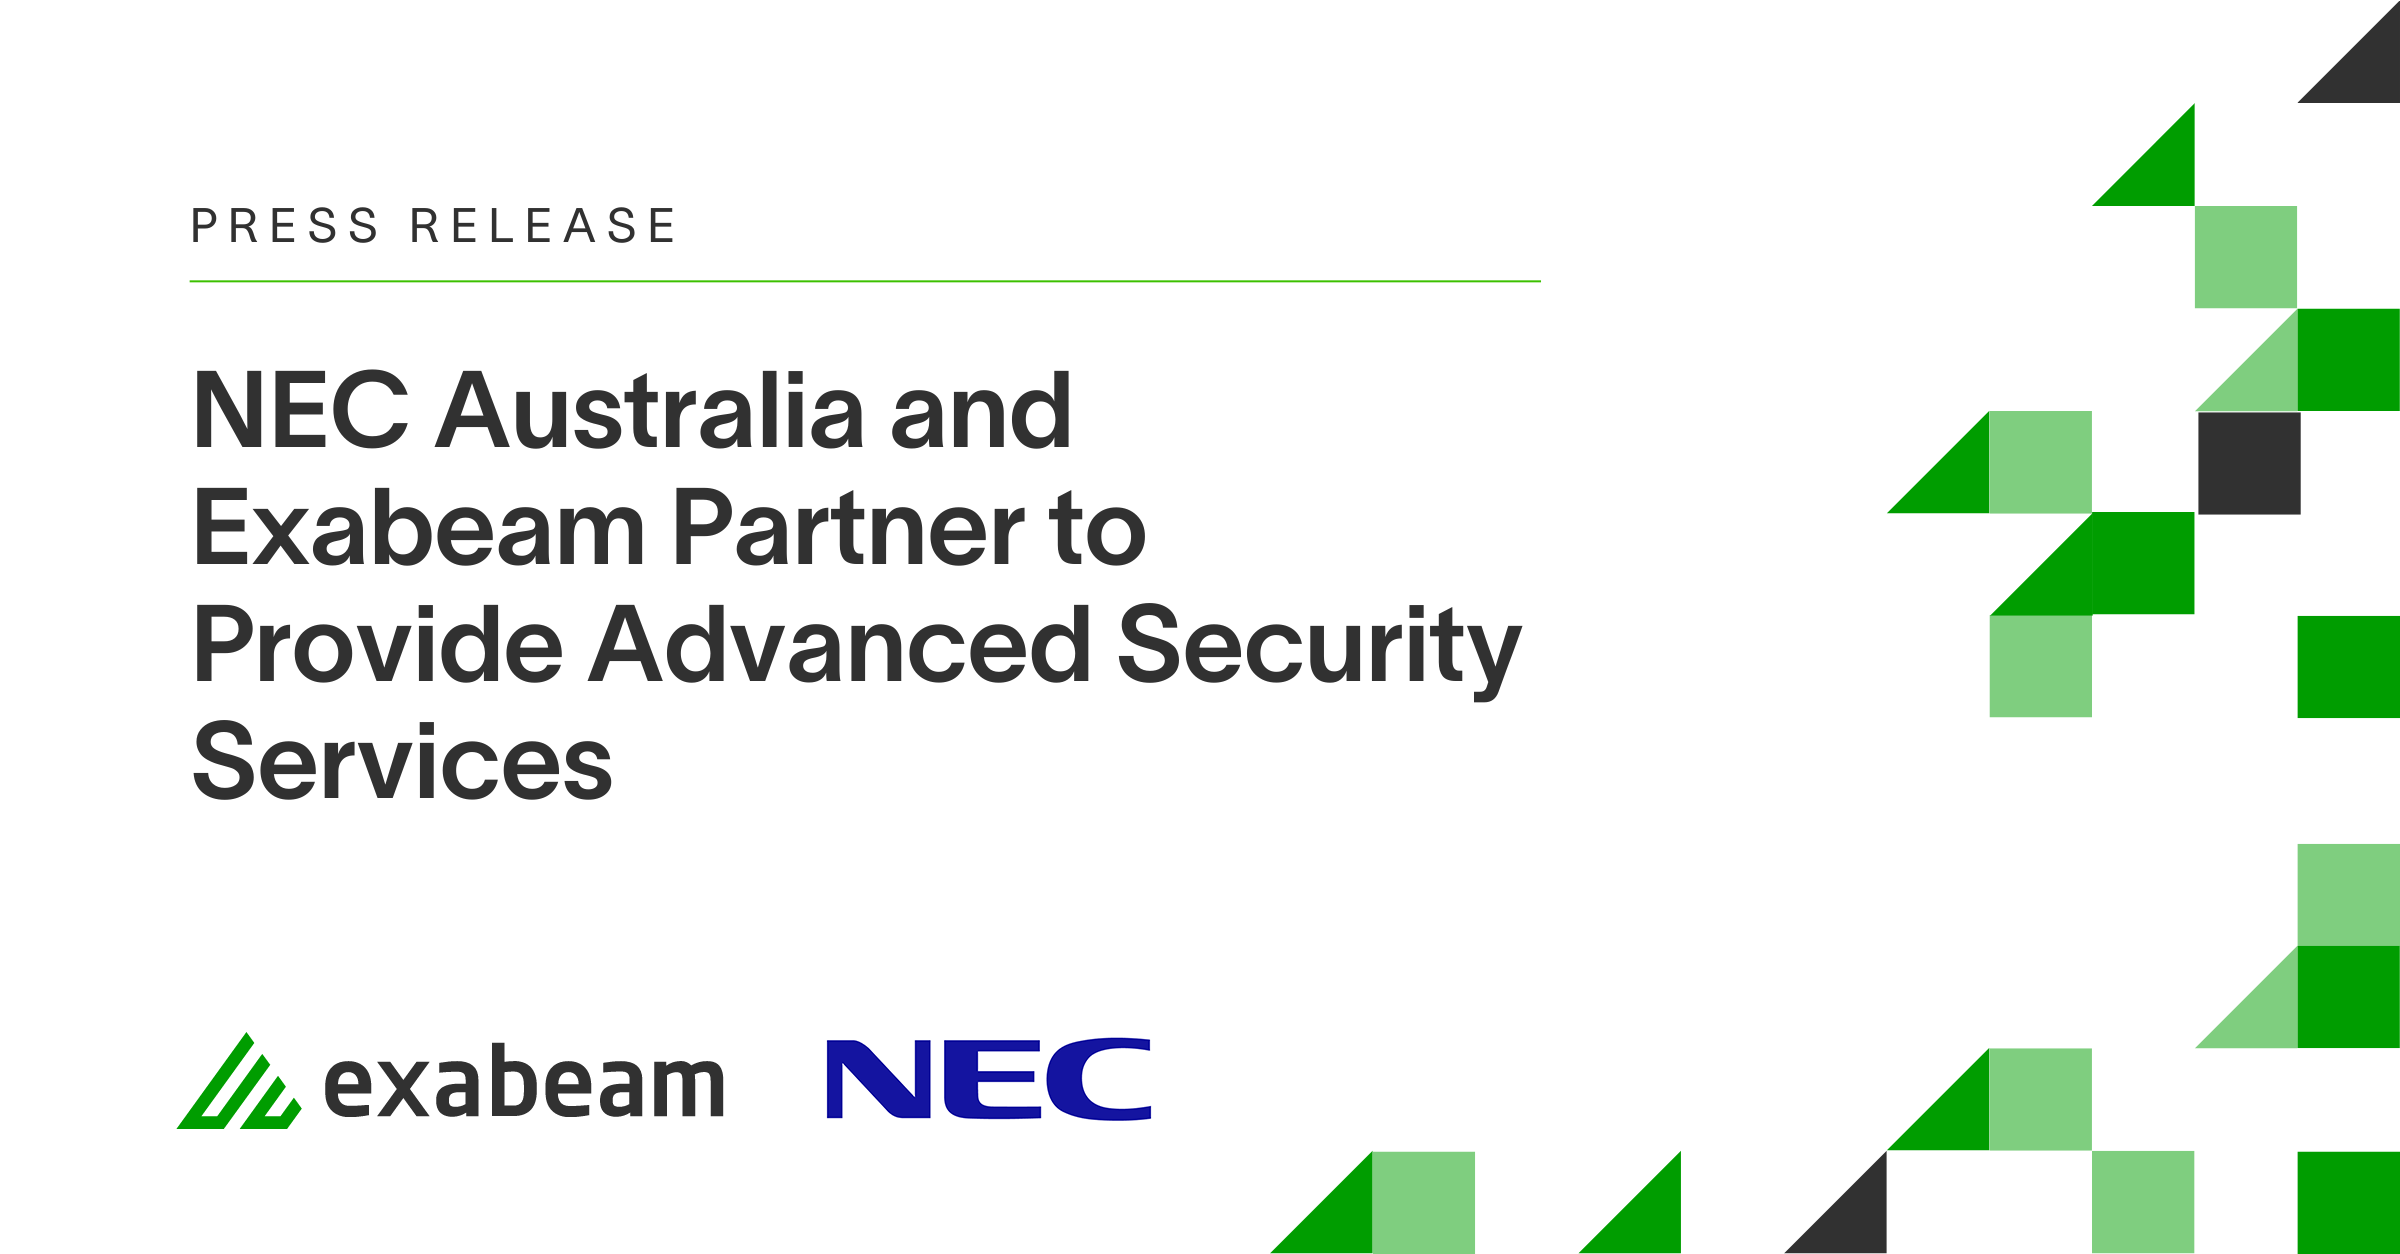 NEC Australia and Exabeam Partner to Provide Advanced Security Services